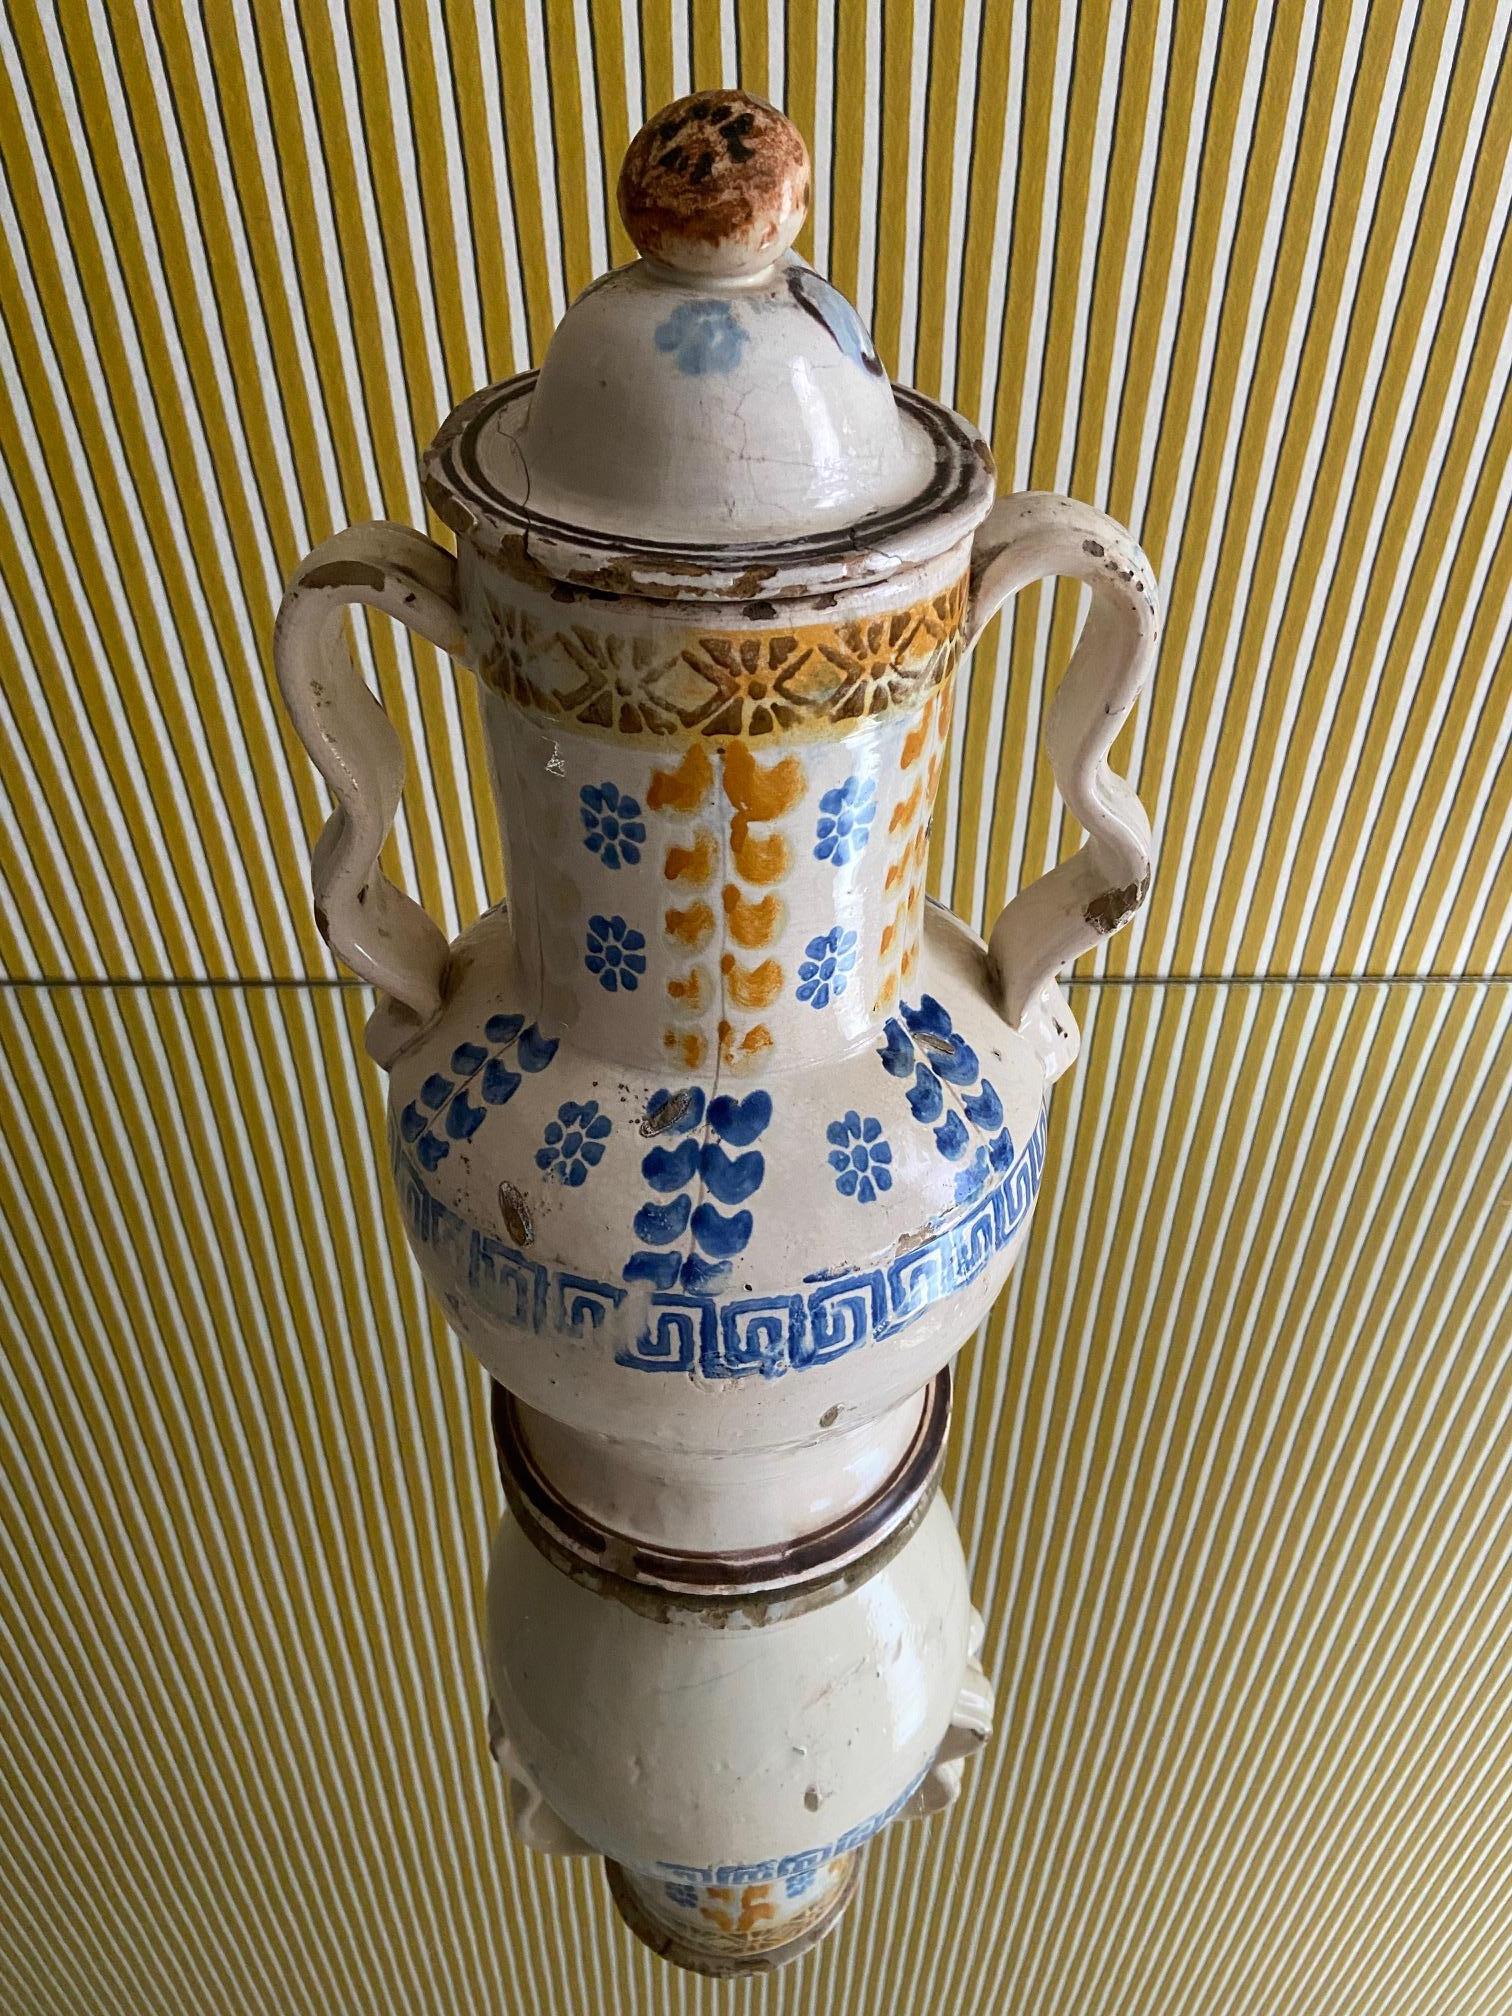 Italian Vintage Ceramic Jar with Handles and Decorations, Italy, Late 19th Century